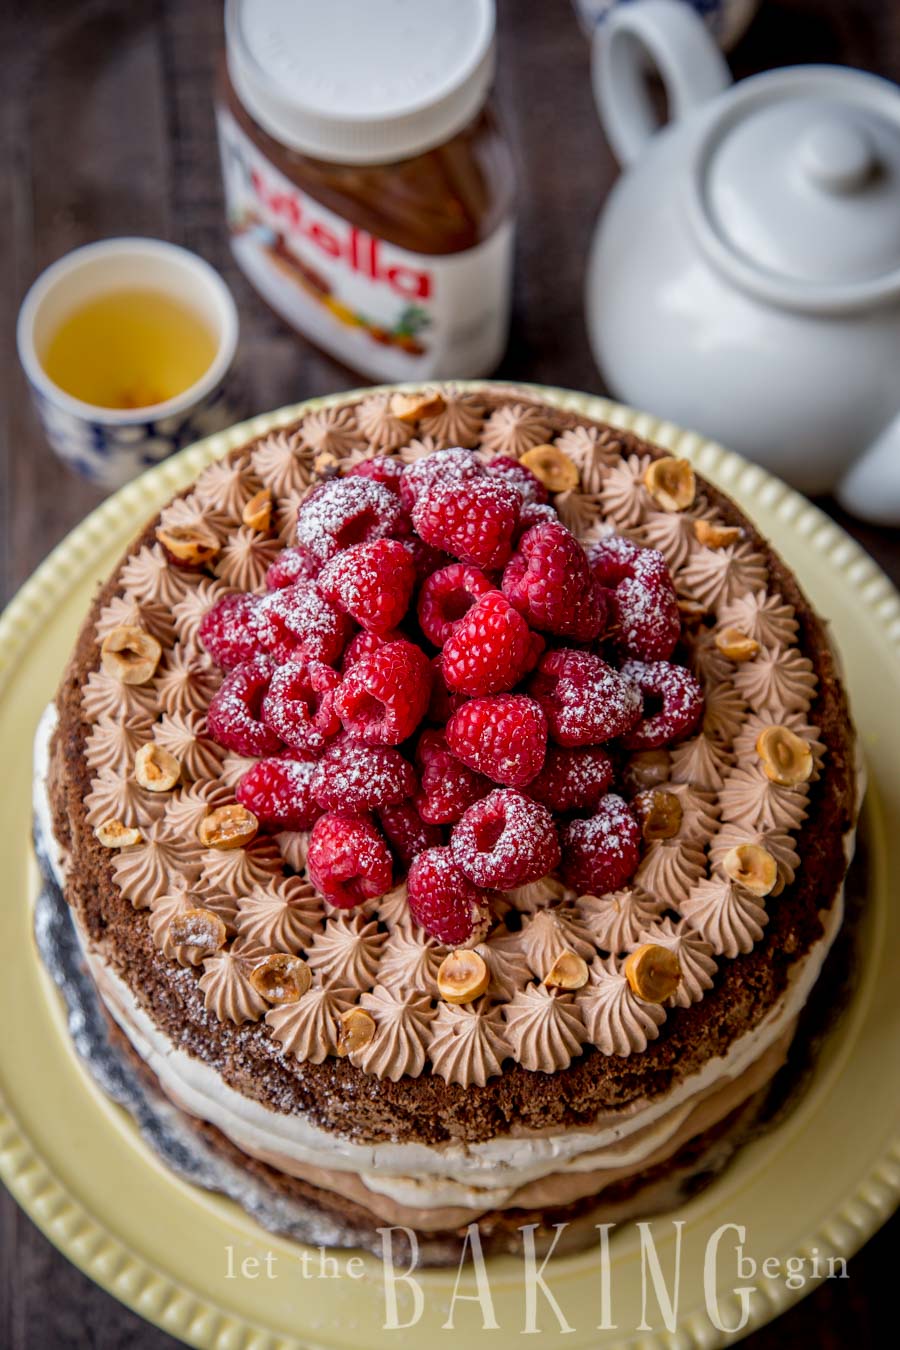 Hazelnut Meringue Nutella Cake - Layers Chocolate Poppyseed Cake, Hazelnut Meringue and Nutella Custard Buttercream will have your guests swoon from this deliciousness! Step by Step pictures are included for guaranteed success! | by Let the Baking Begin!